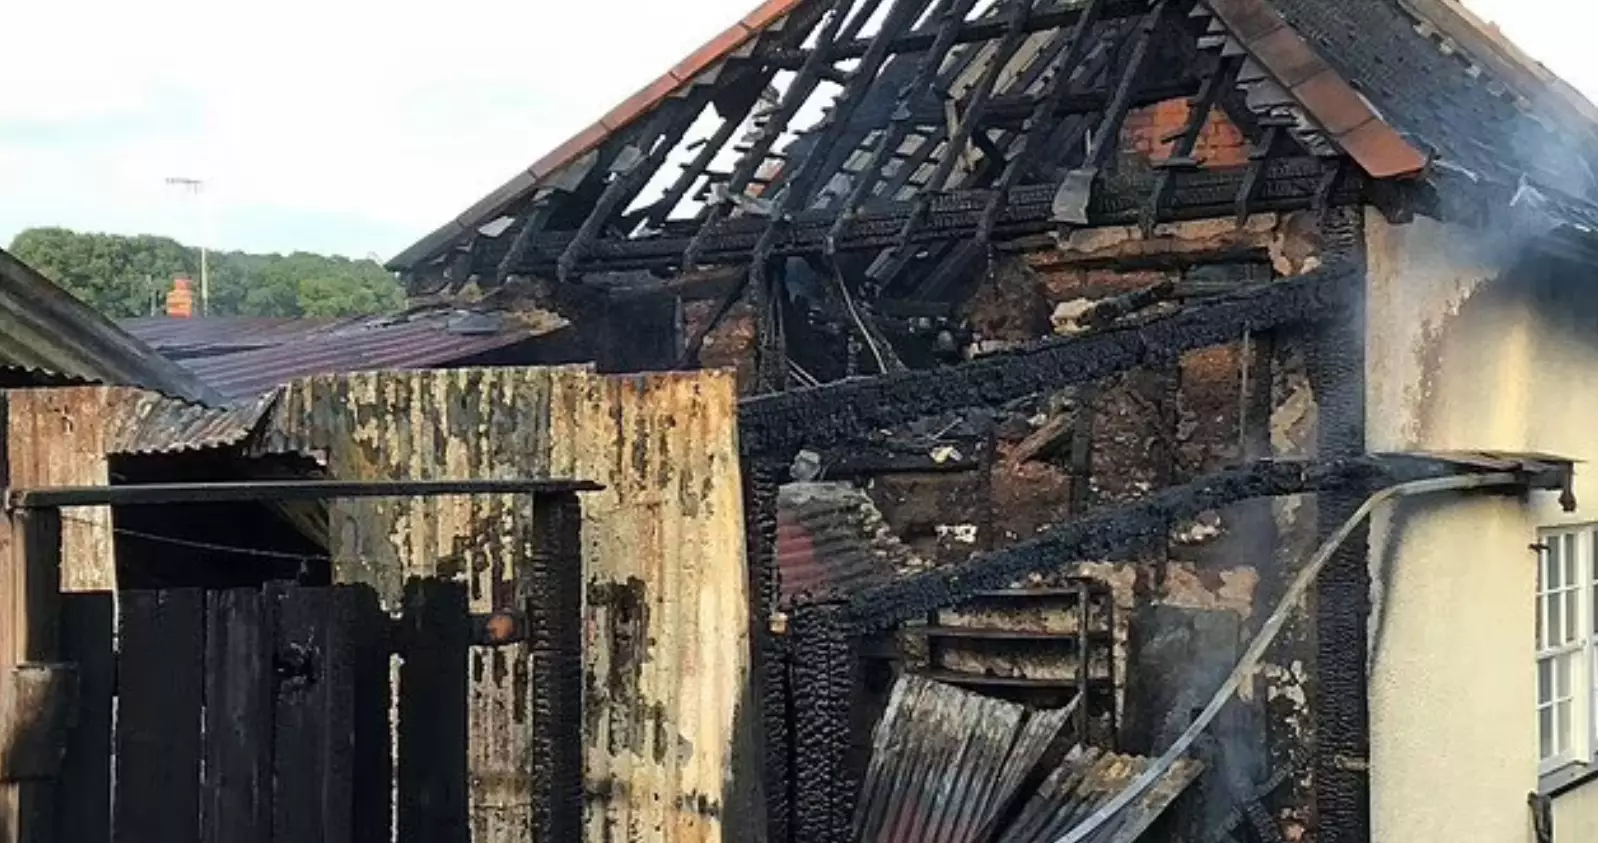 The house was due to be sold three days after the blaze.